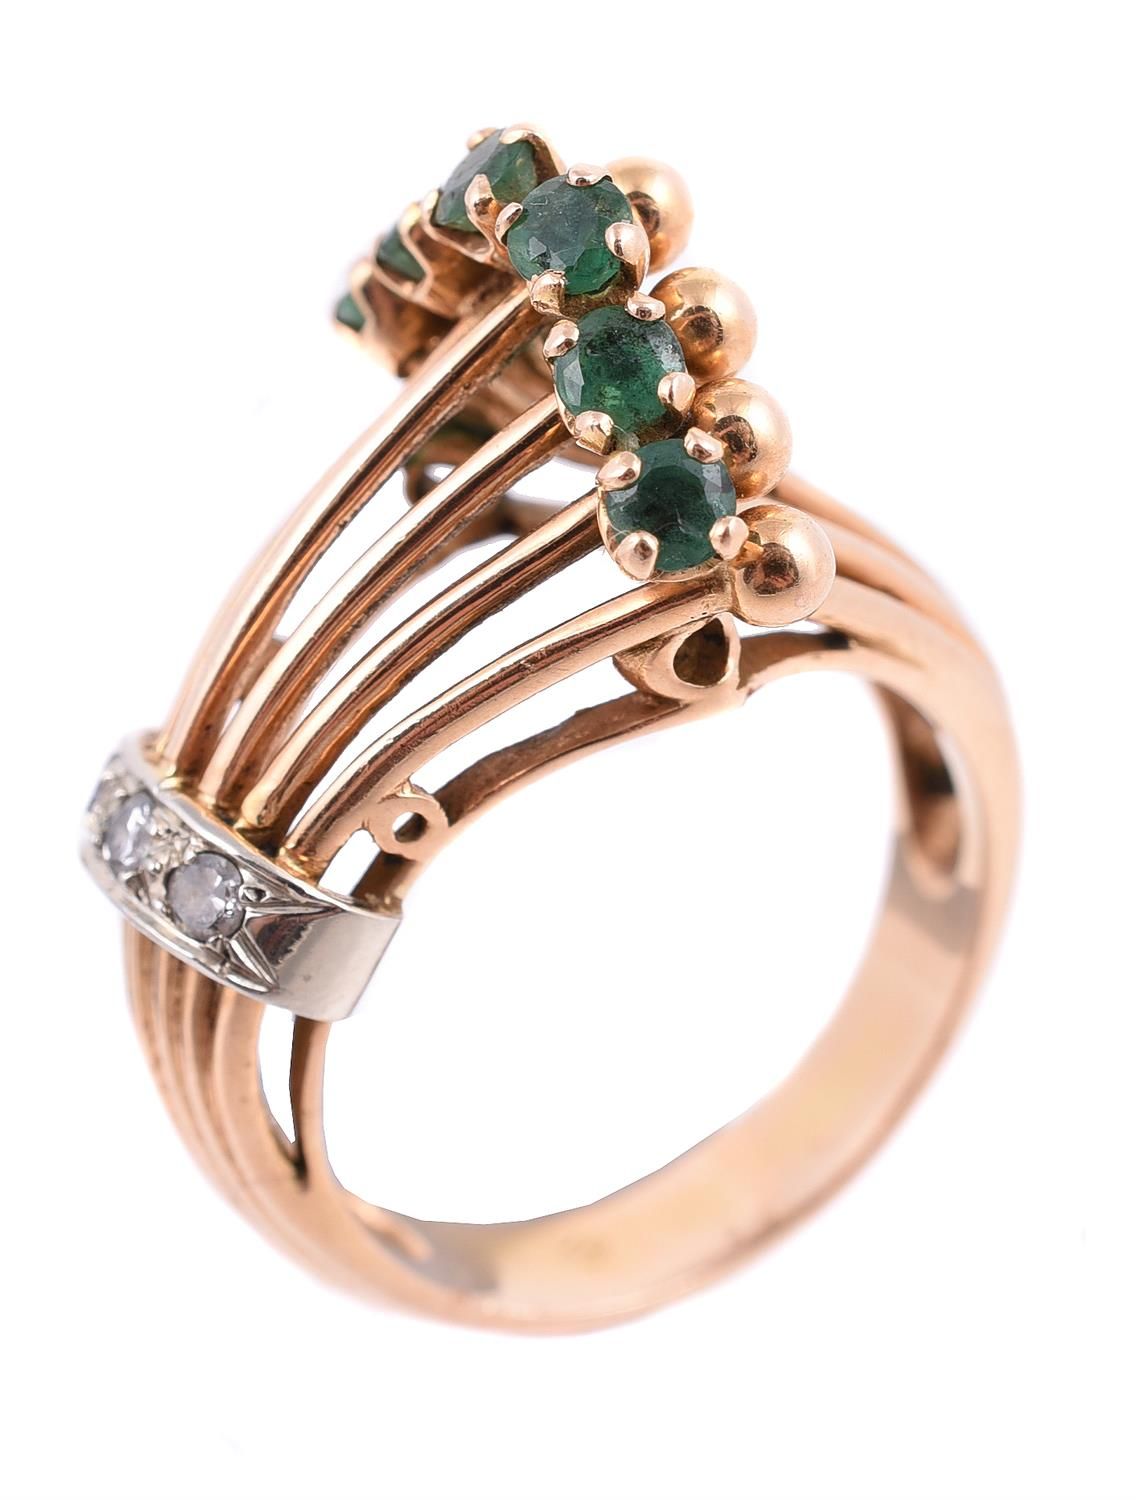 A French mid 20th century Retro emerald and diamond dress ring Une bague rétro f&hellip;